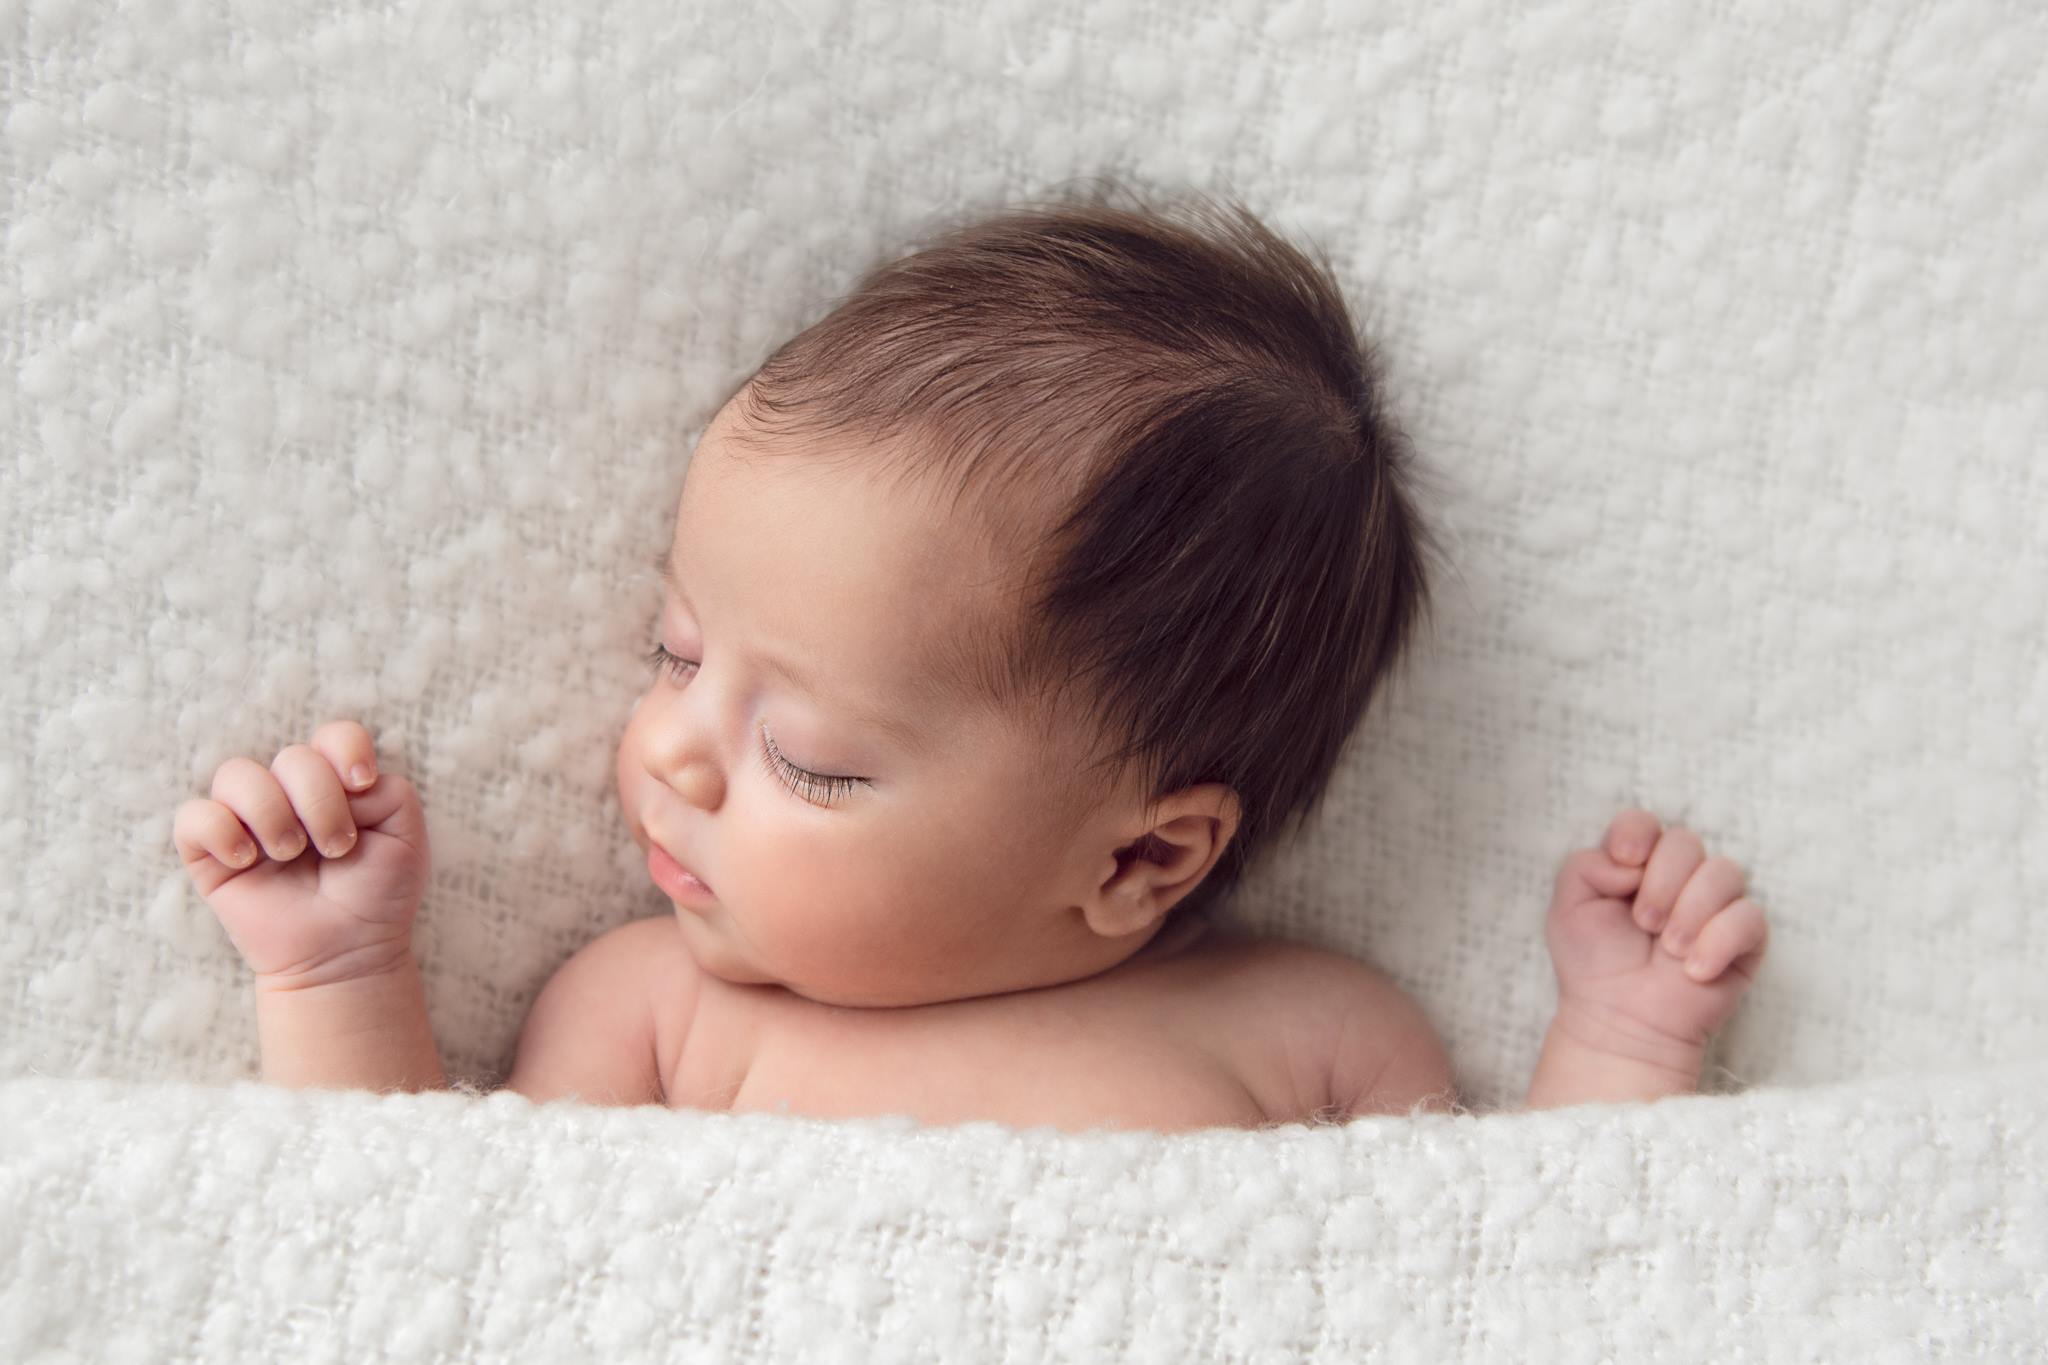 newborn photography - pose you can do at home